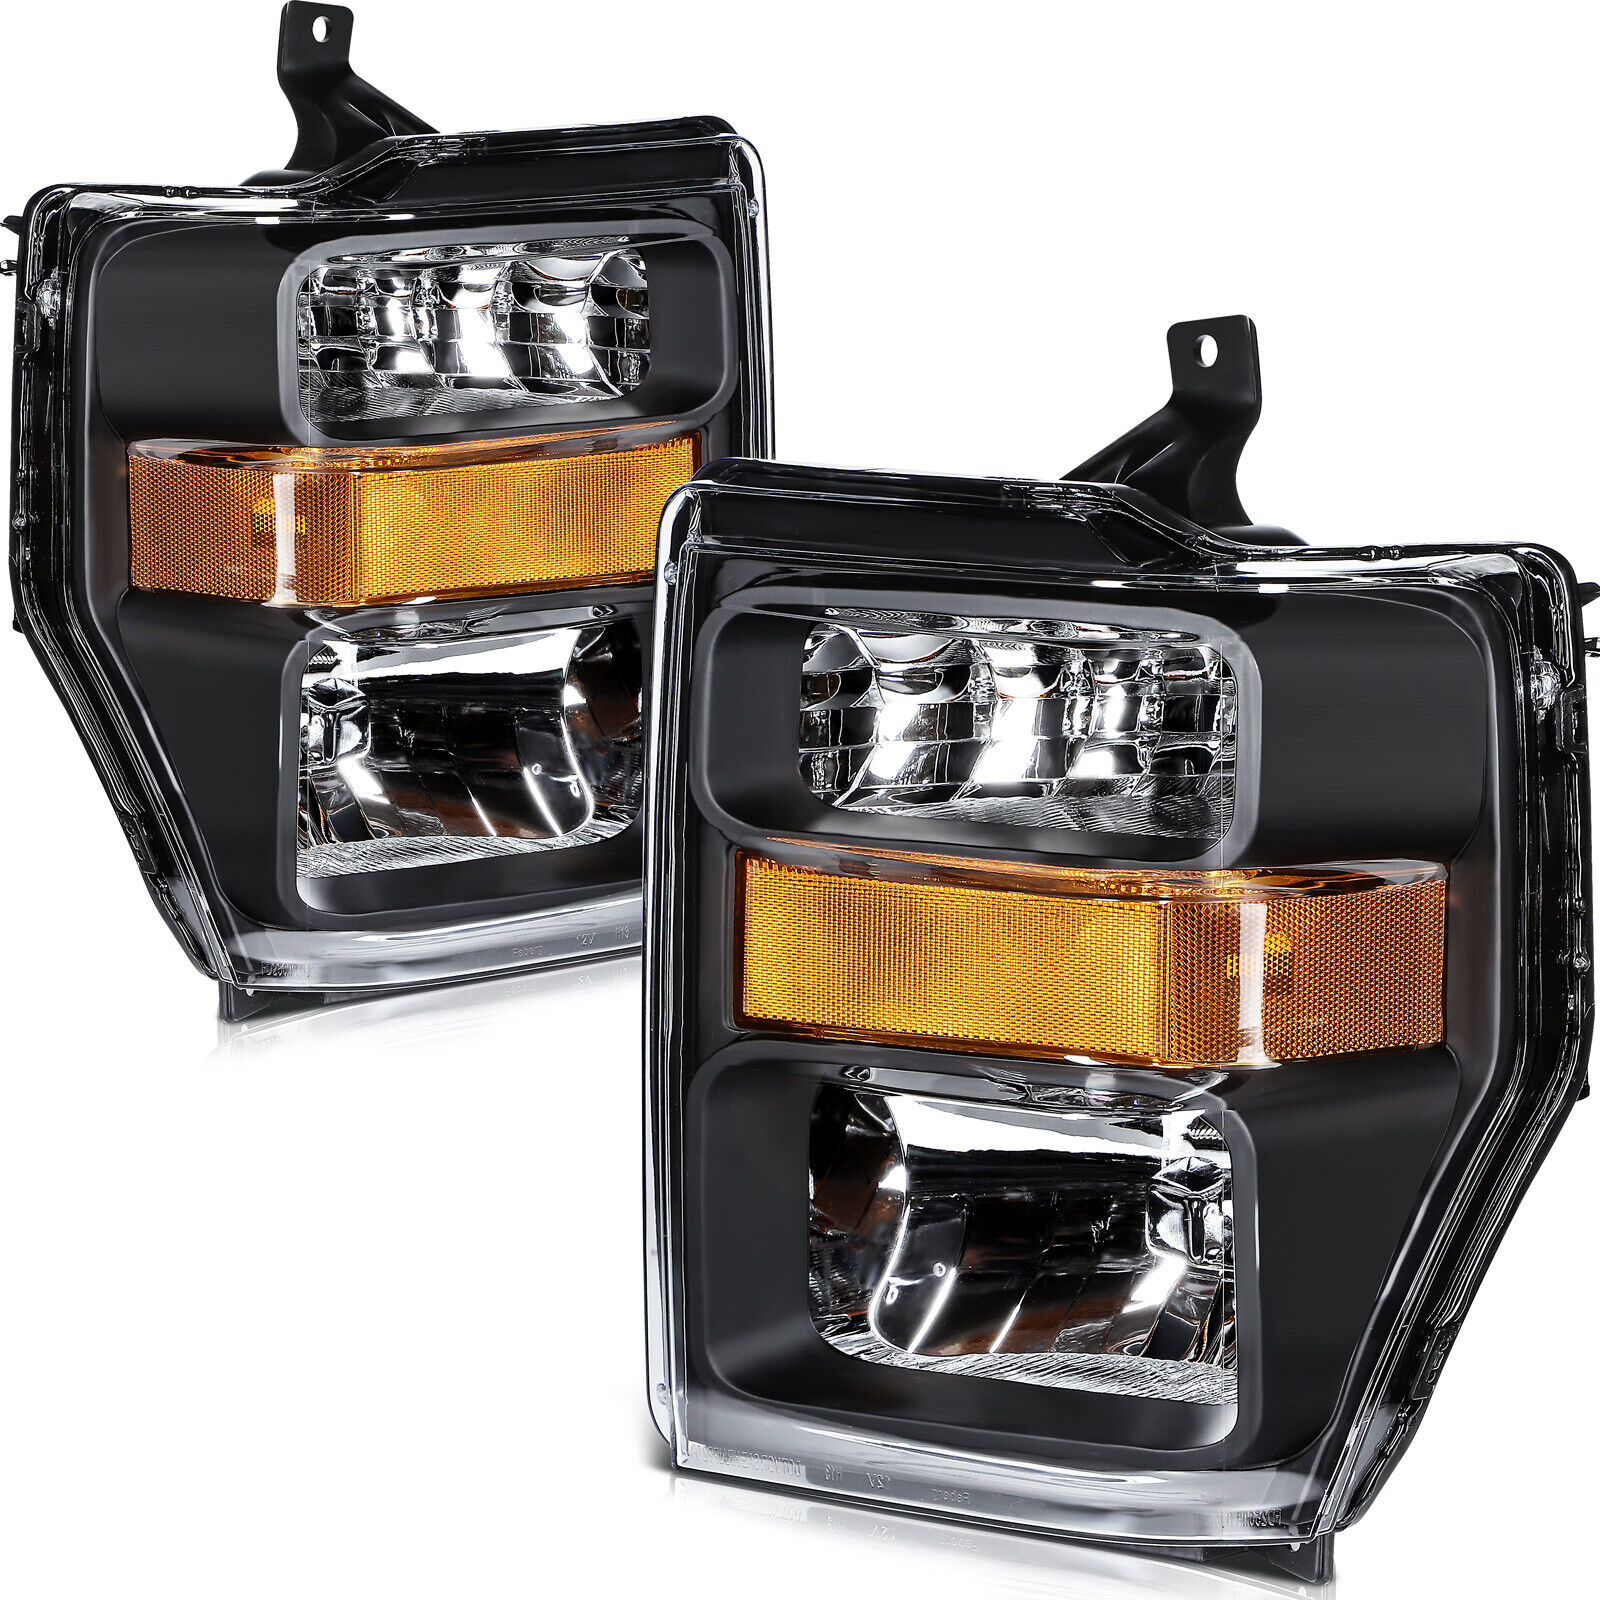 For Ford F-250 F-350 F-450 F-550 Super Duty 2008-2010 Headlights Assembly Pair